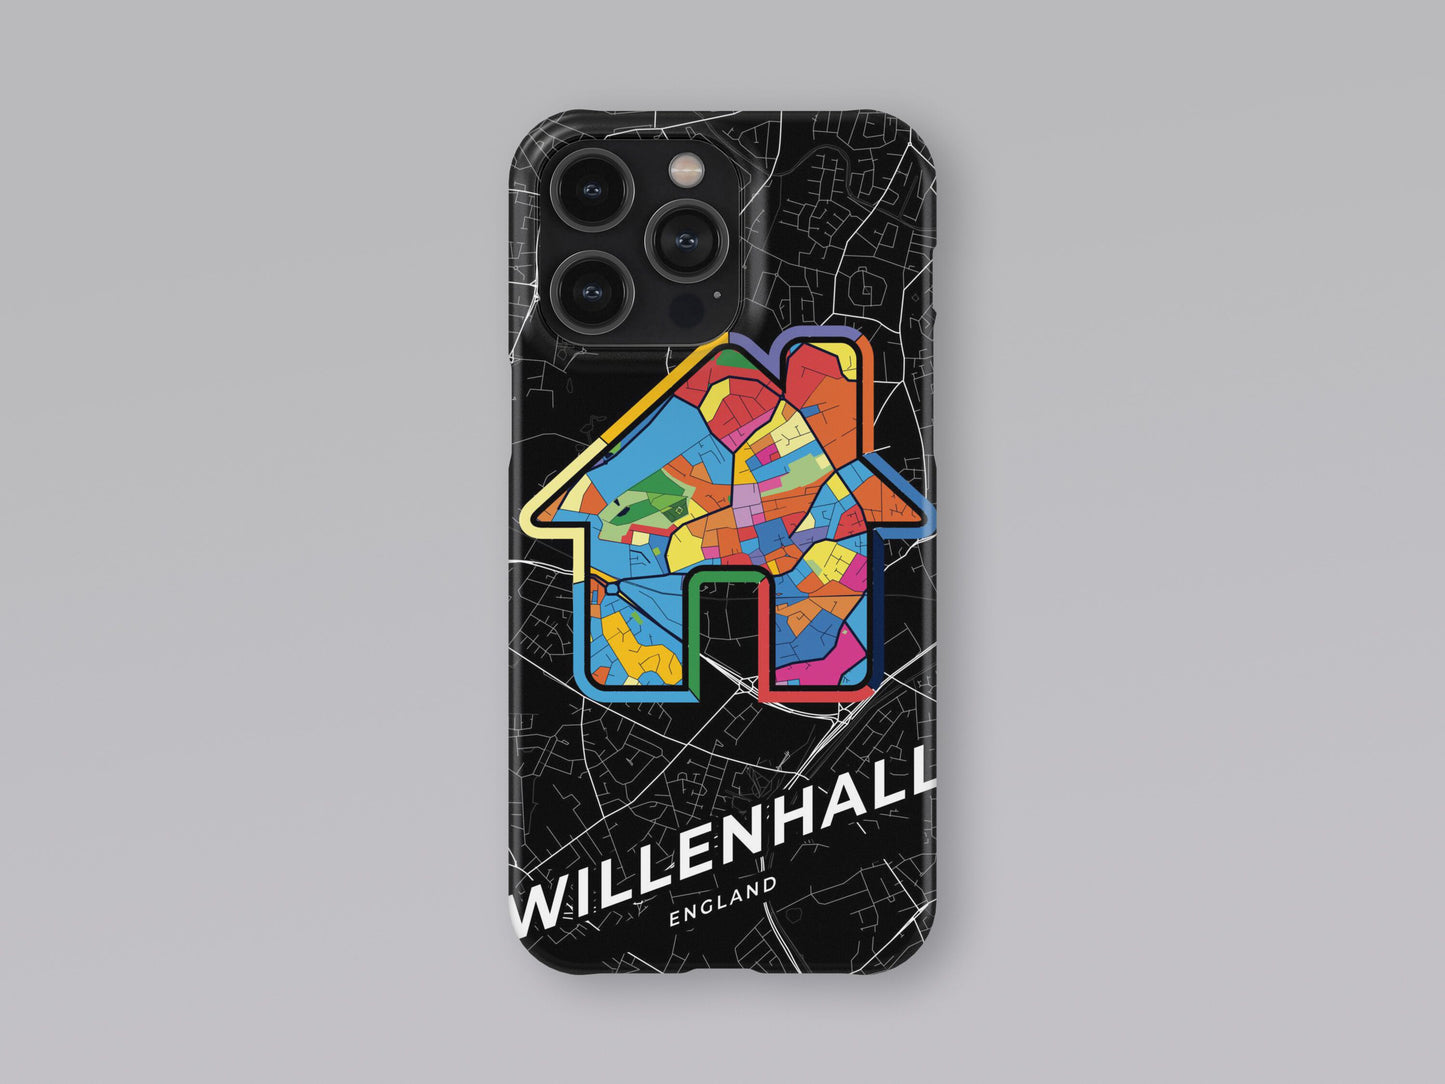 Willenhall England slim phone case with colorful icon 3